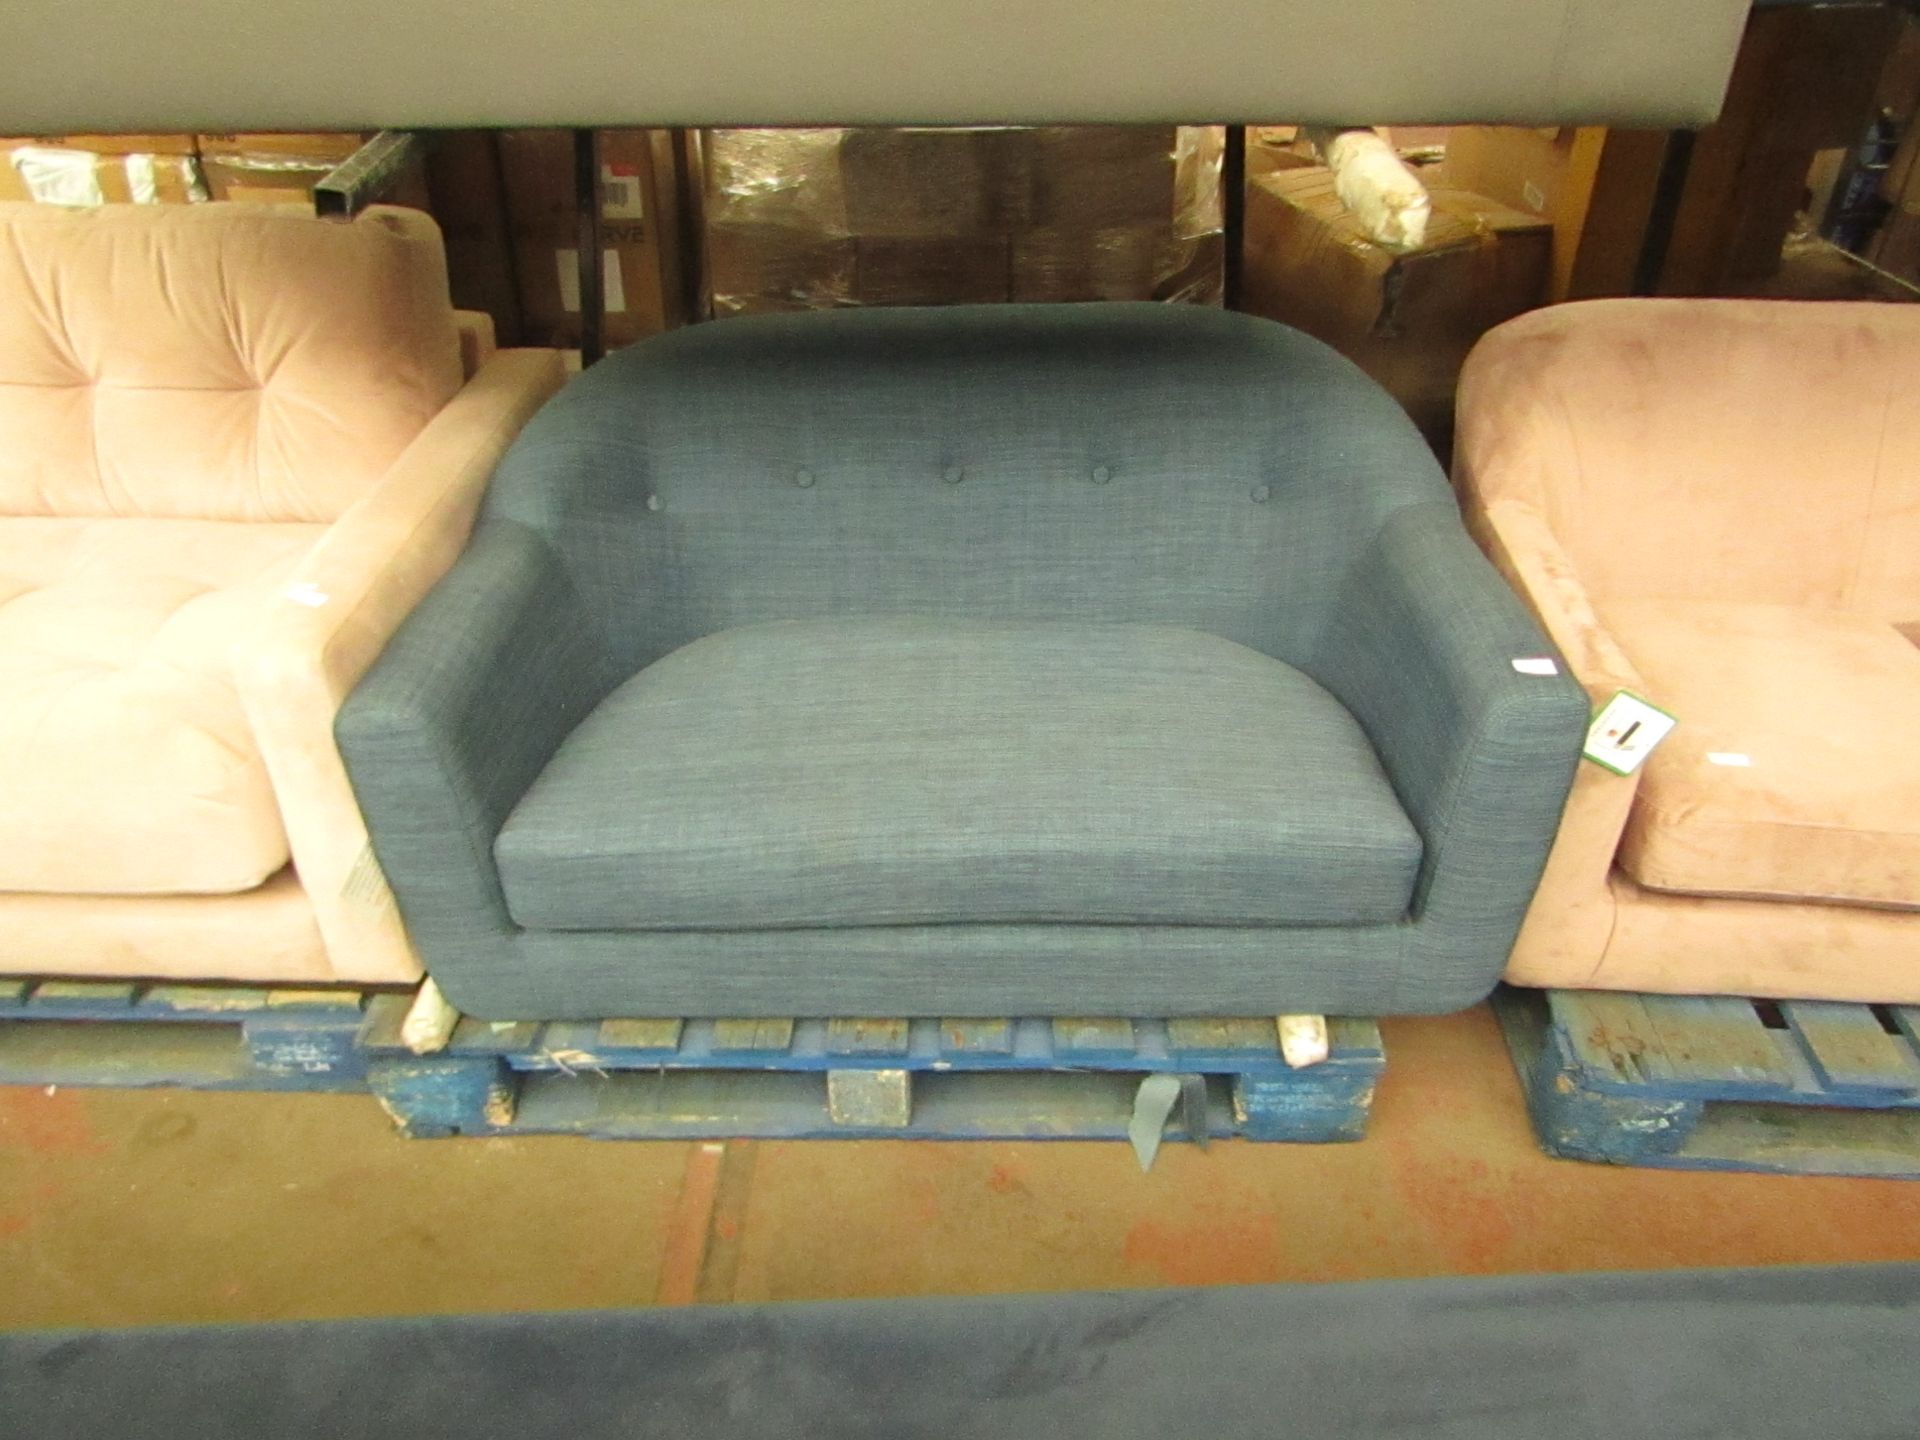 | 1X | MADE.COM BLUE TUBBY LOVE SEAT | (PLEASE NOTE, THIS DOES NOT PROVIDE ANY WARRANTY OR GUARANTEE